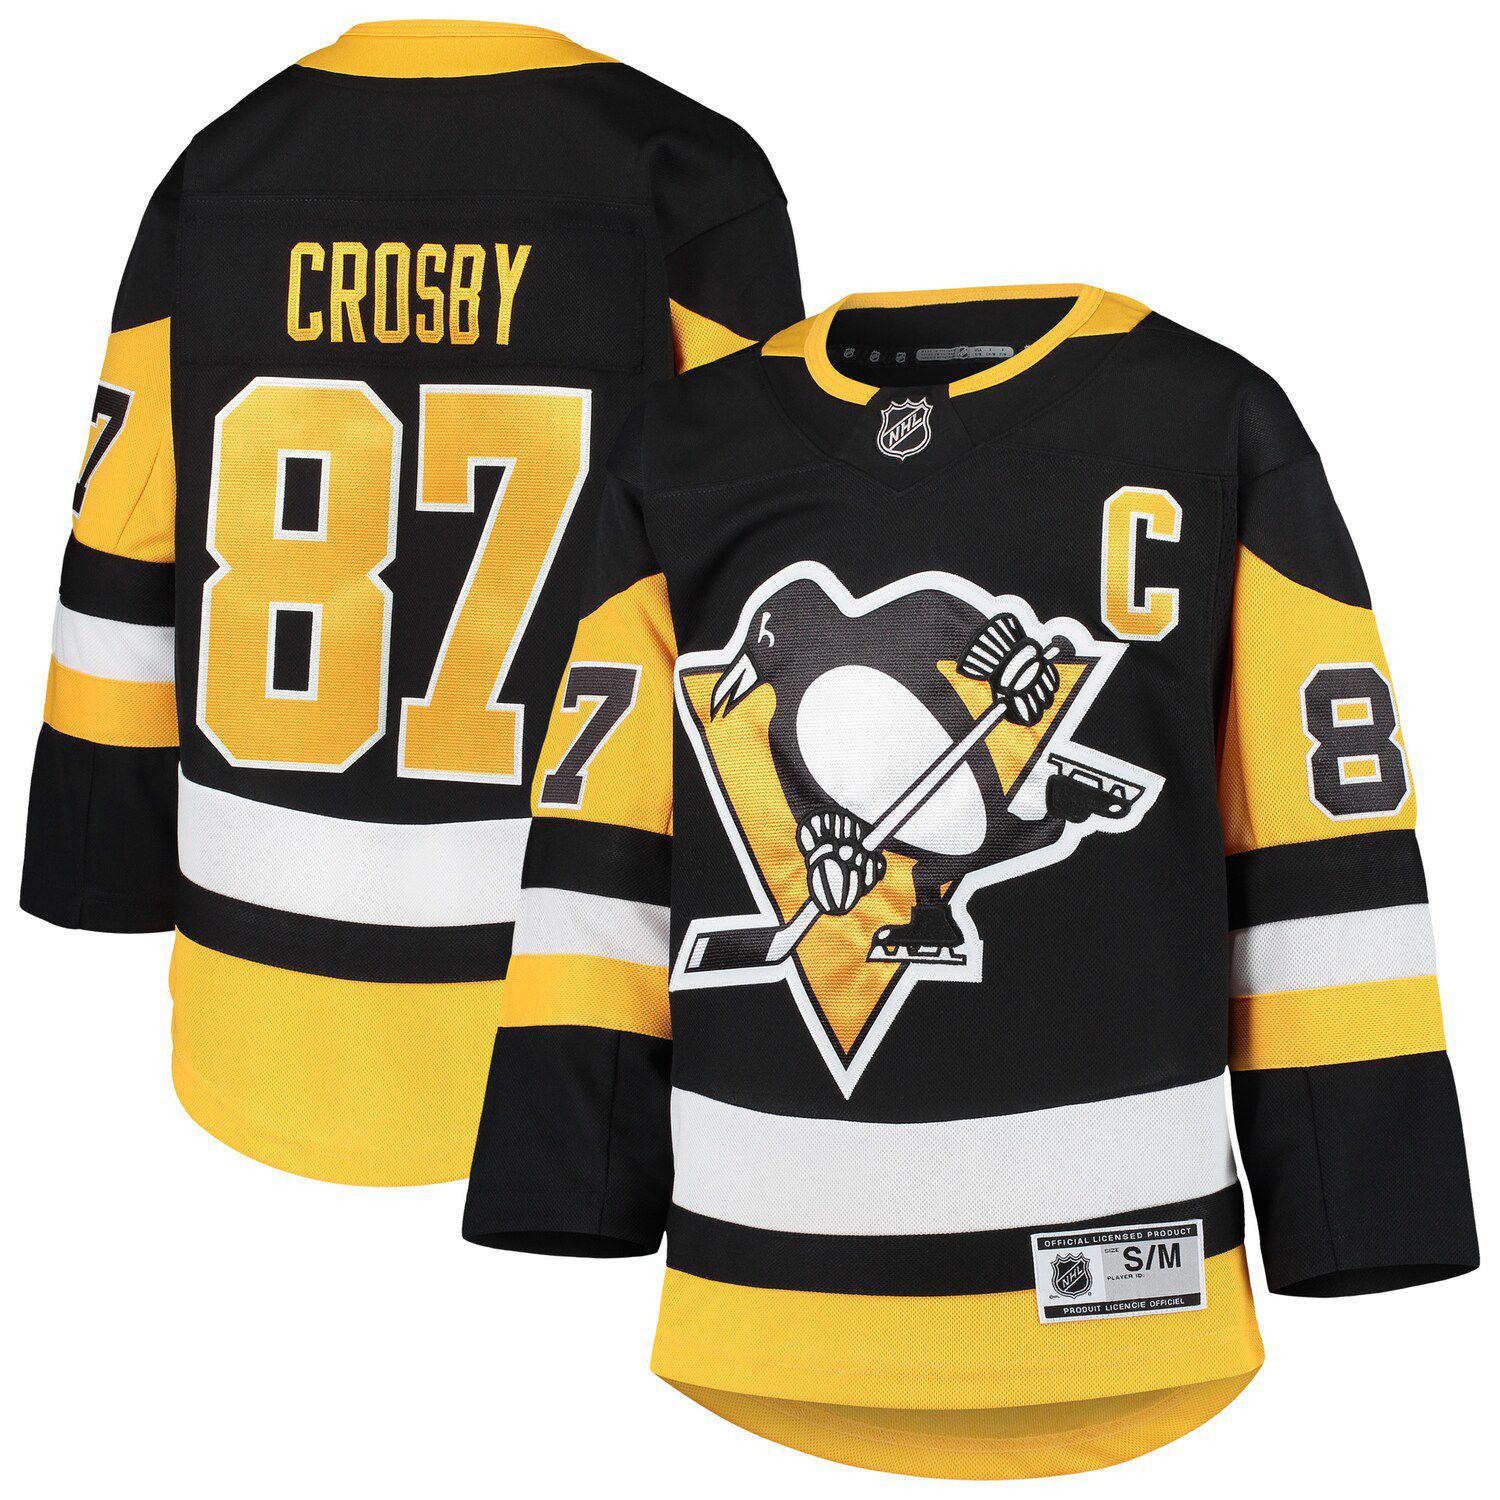 youth crosby jersey